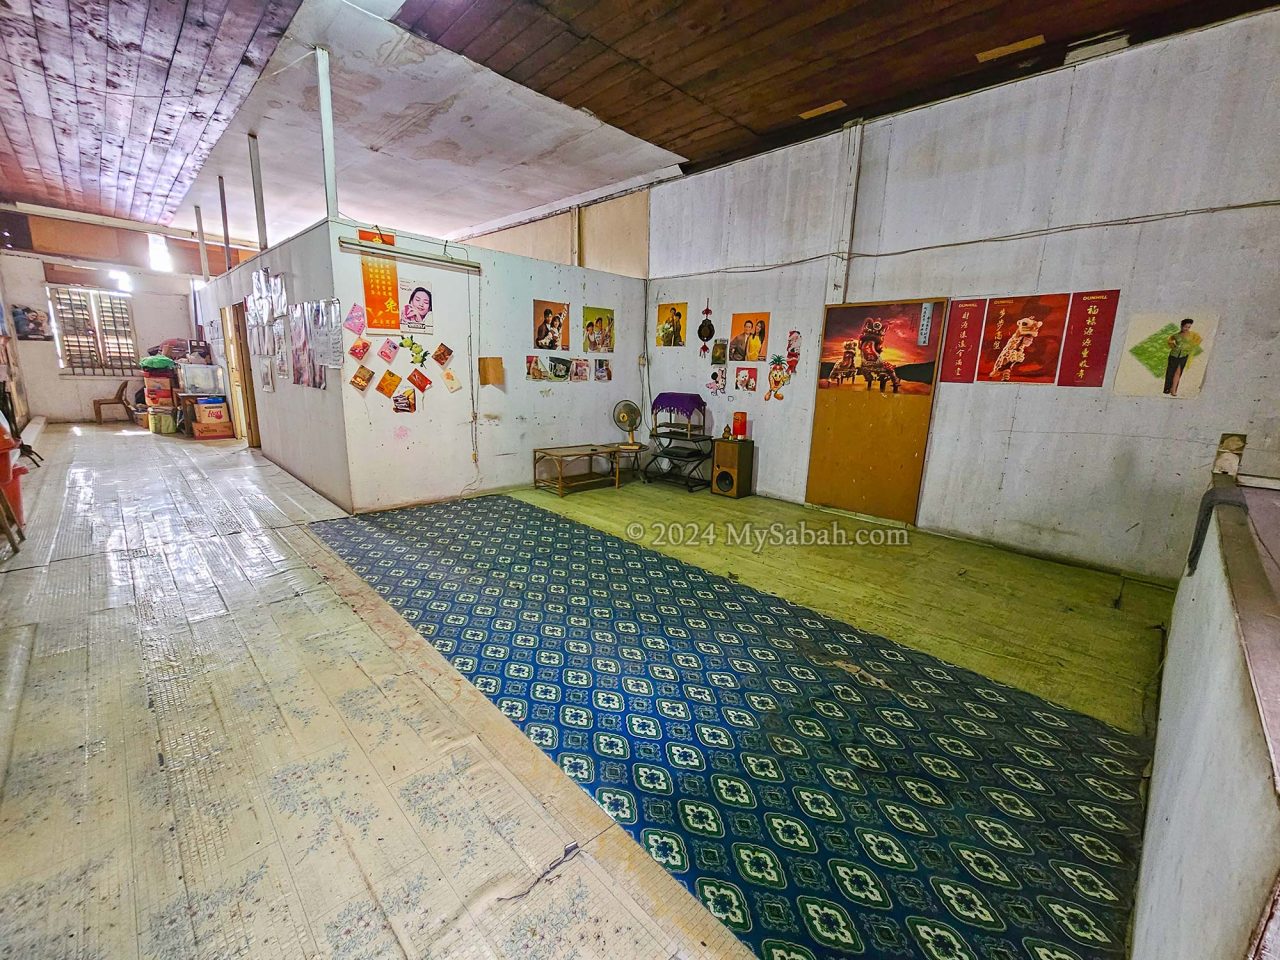 The upper floor of a pre-WWII shophouse in Membakut